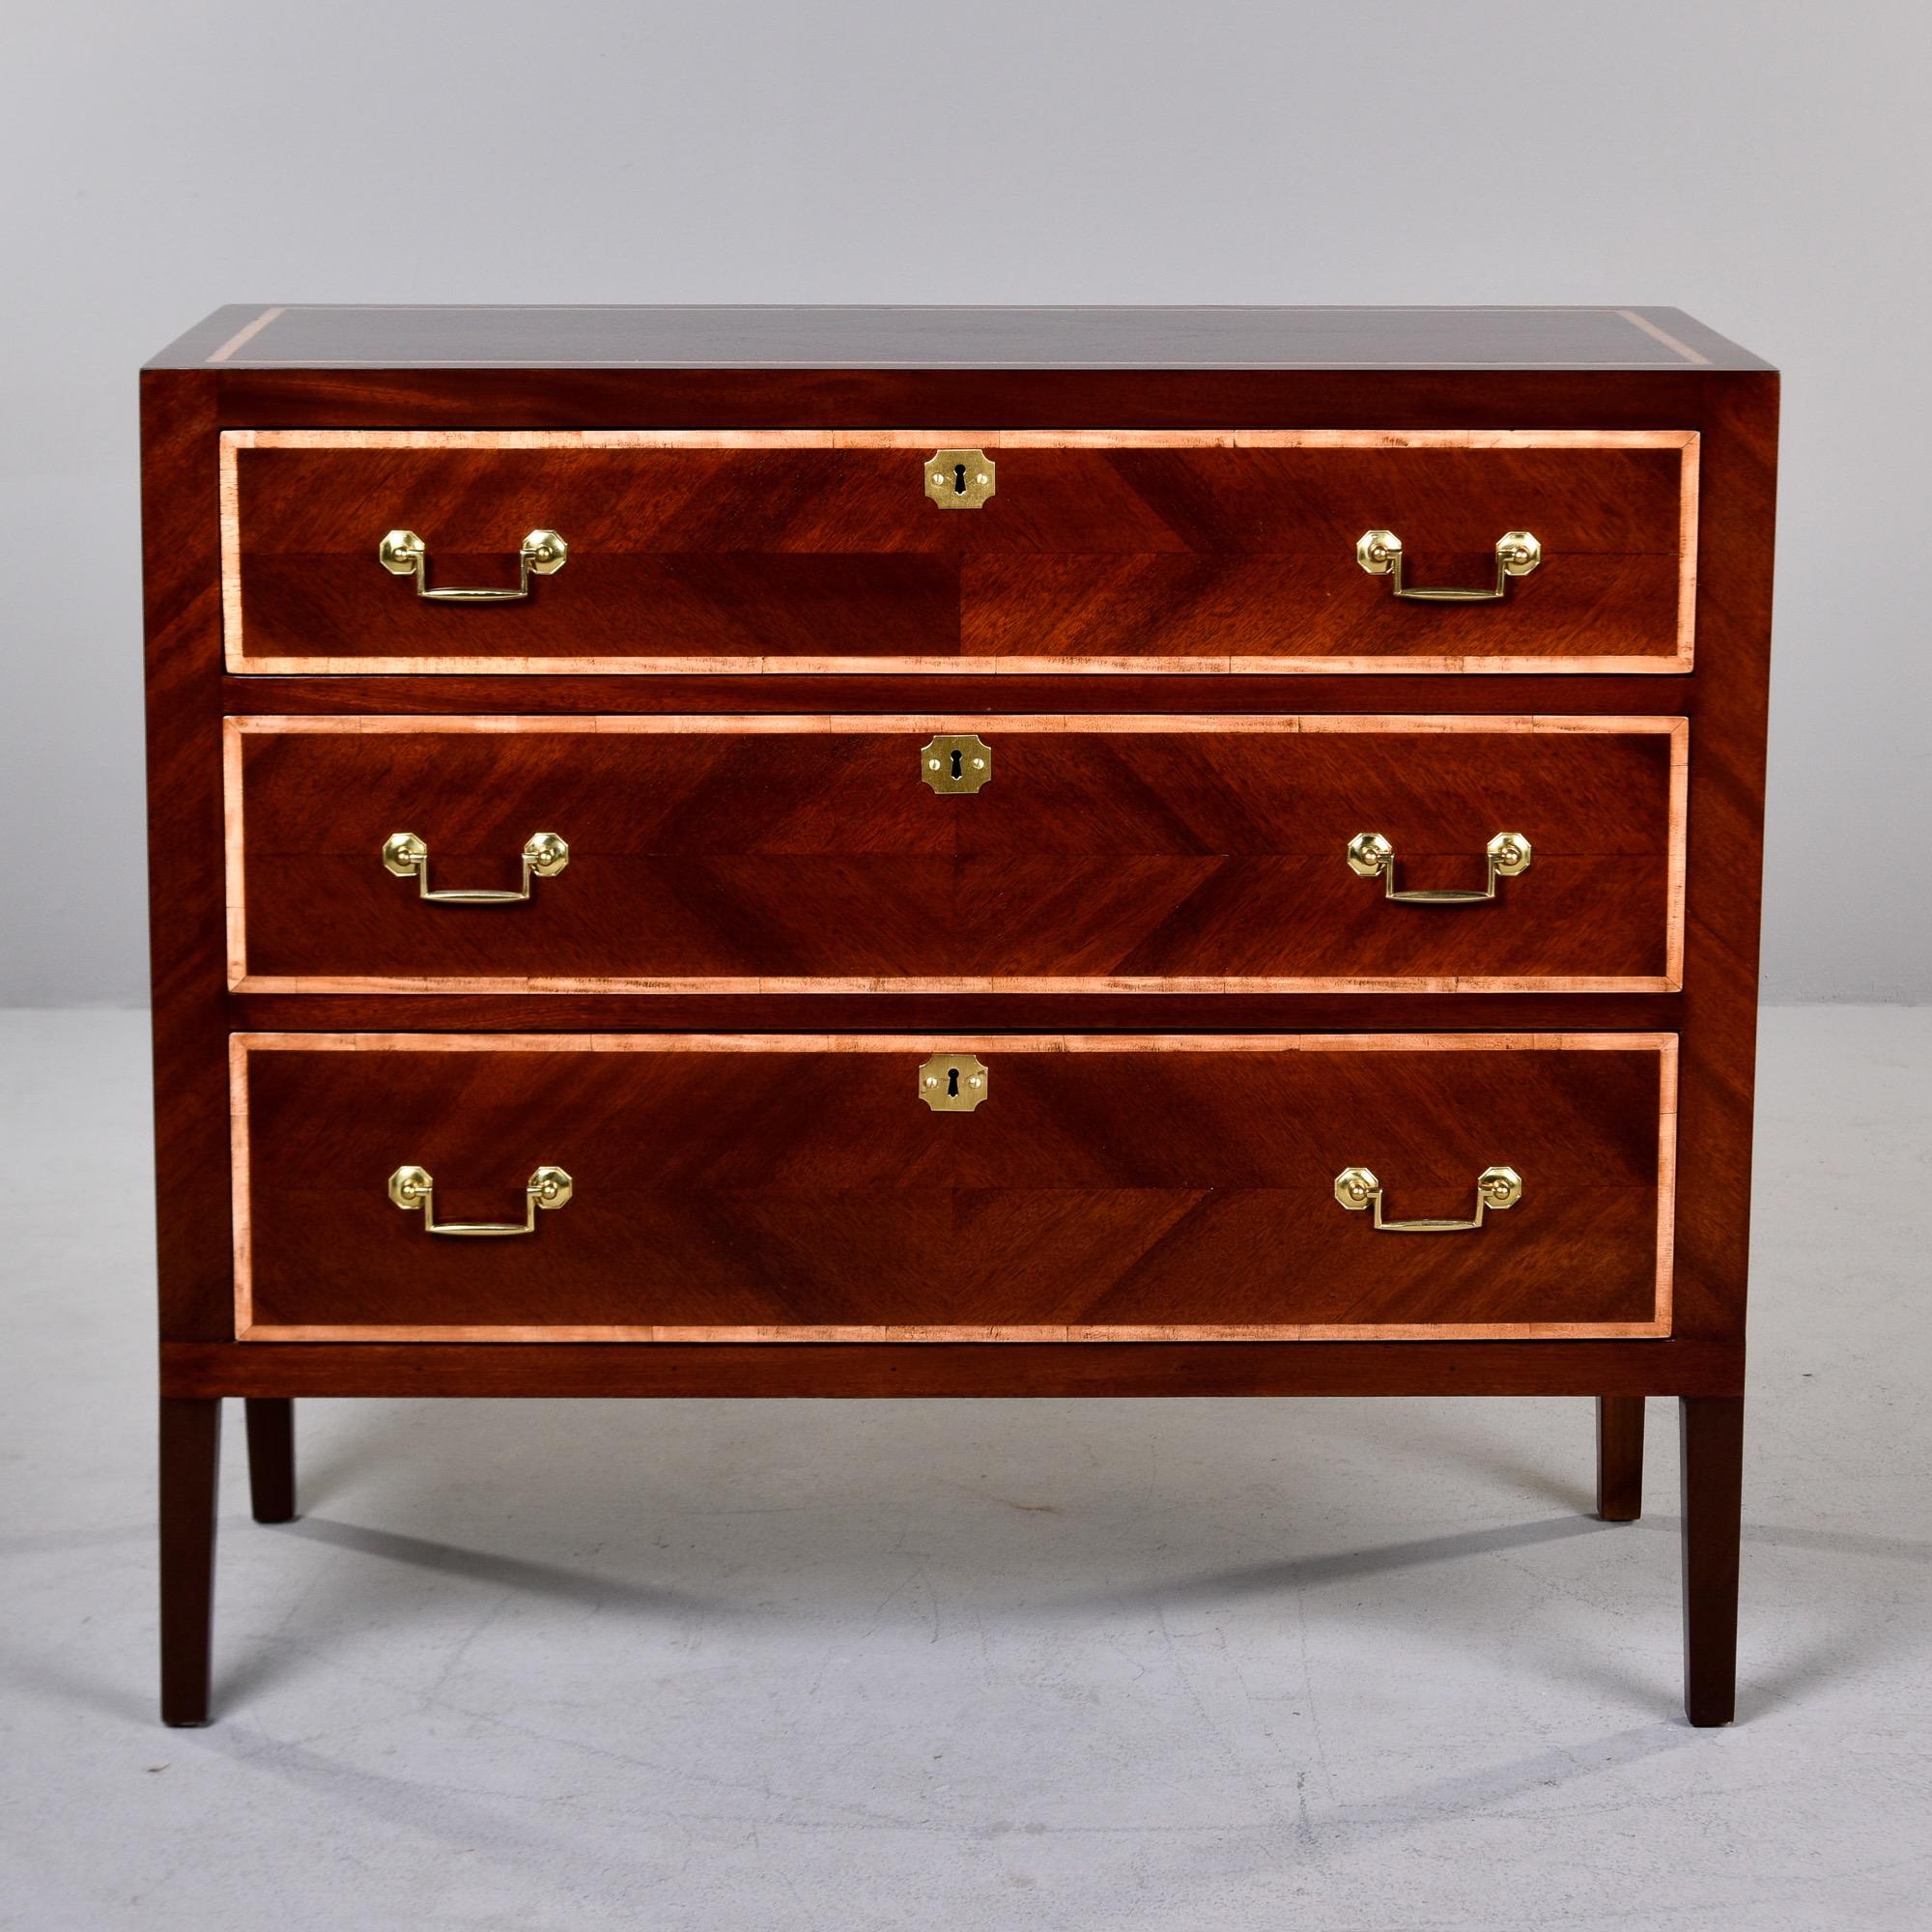 Found in England, this pair of three drawer chests dates from approximately 1900. Chests feature dark walnut veneer arranged in a decorative pattern with contrasting light maple borders on tops and drawer fronts. Brass drawer pulls and escutcheons.